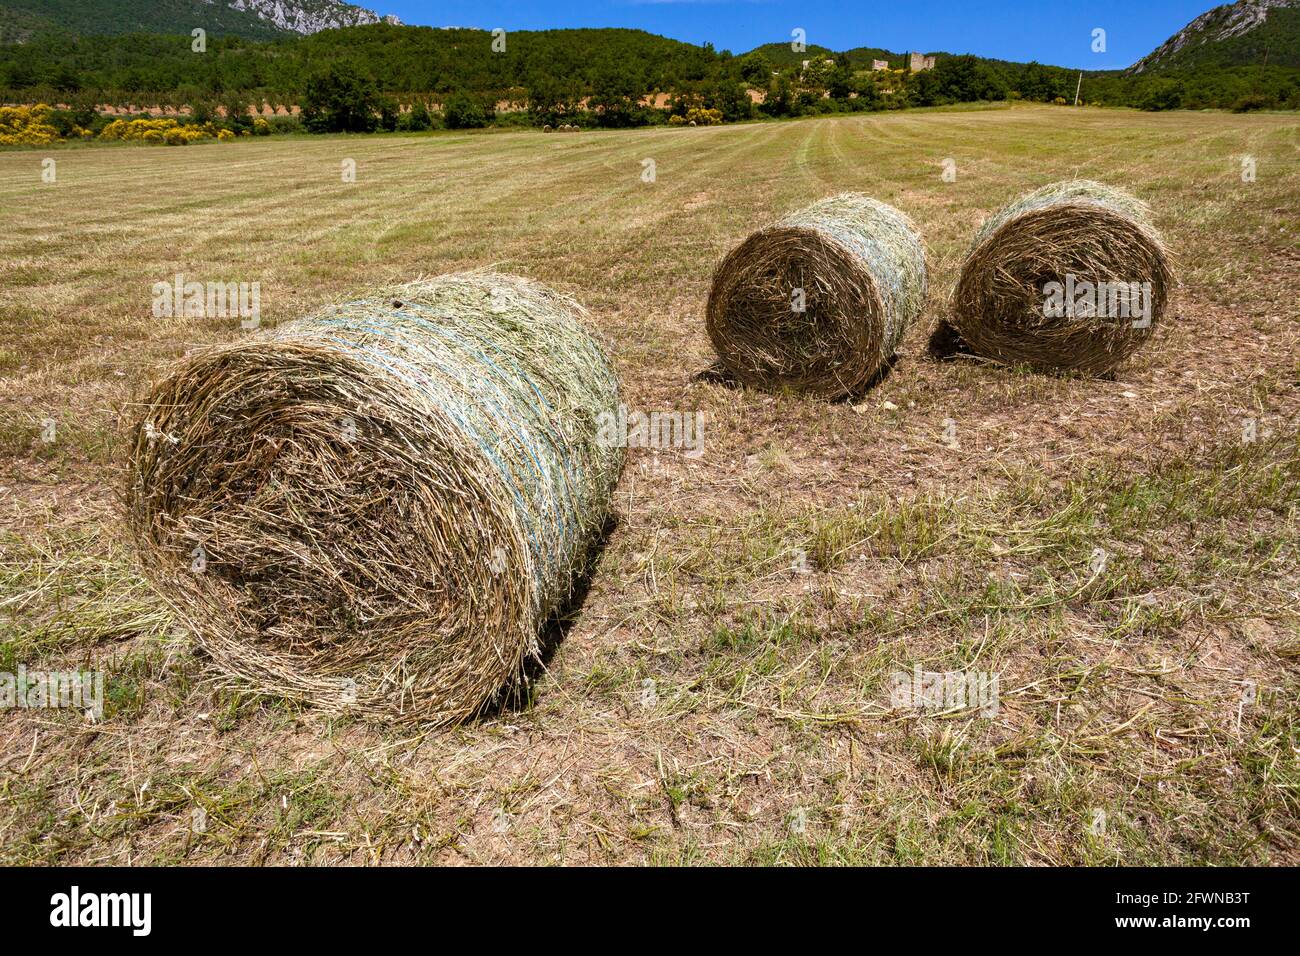 hay harvest in provence france Stock Photo